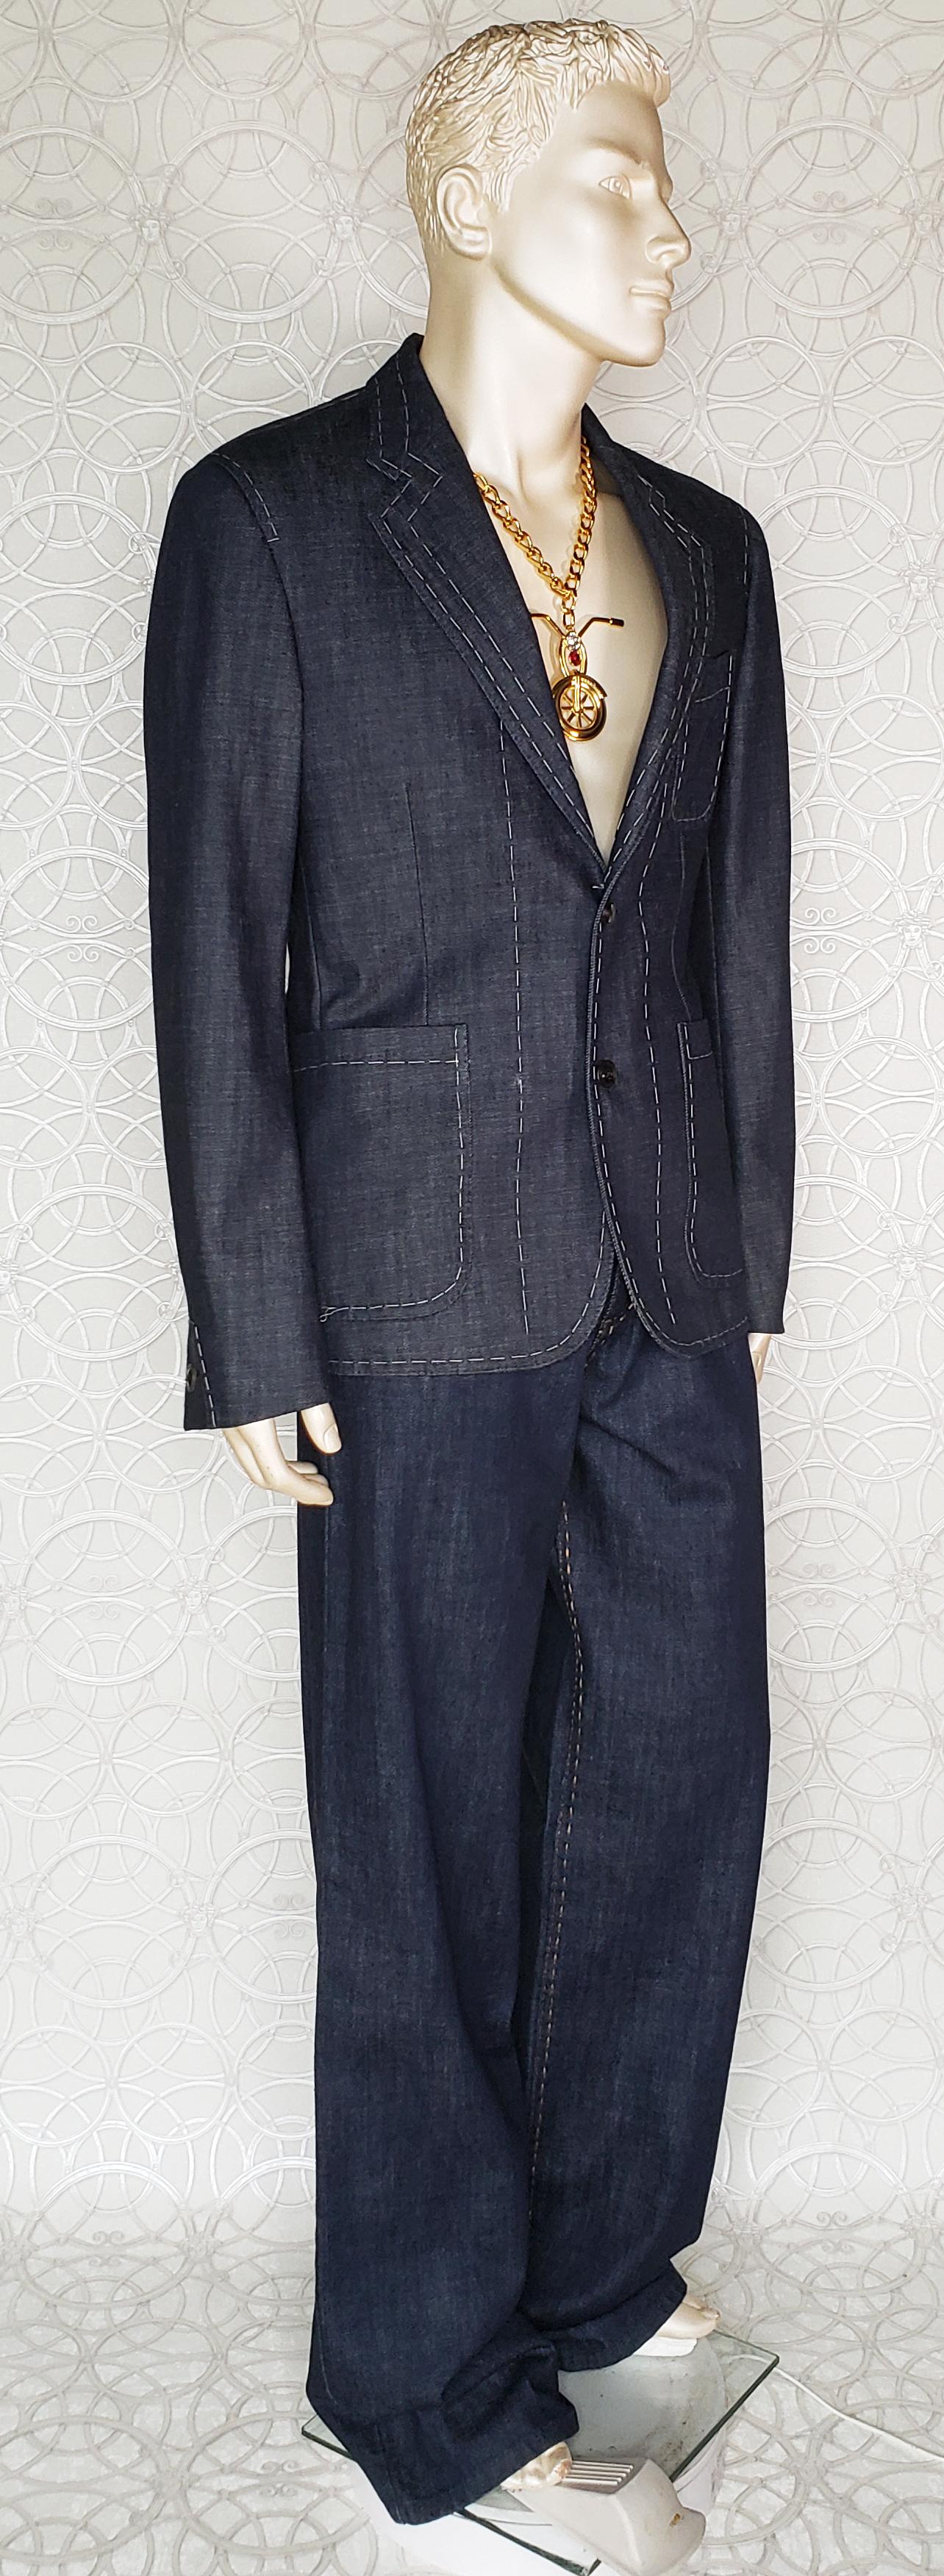 F/W 2015 look #30 NEW VERSACE JEANS SUIT For Sale 2